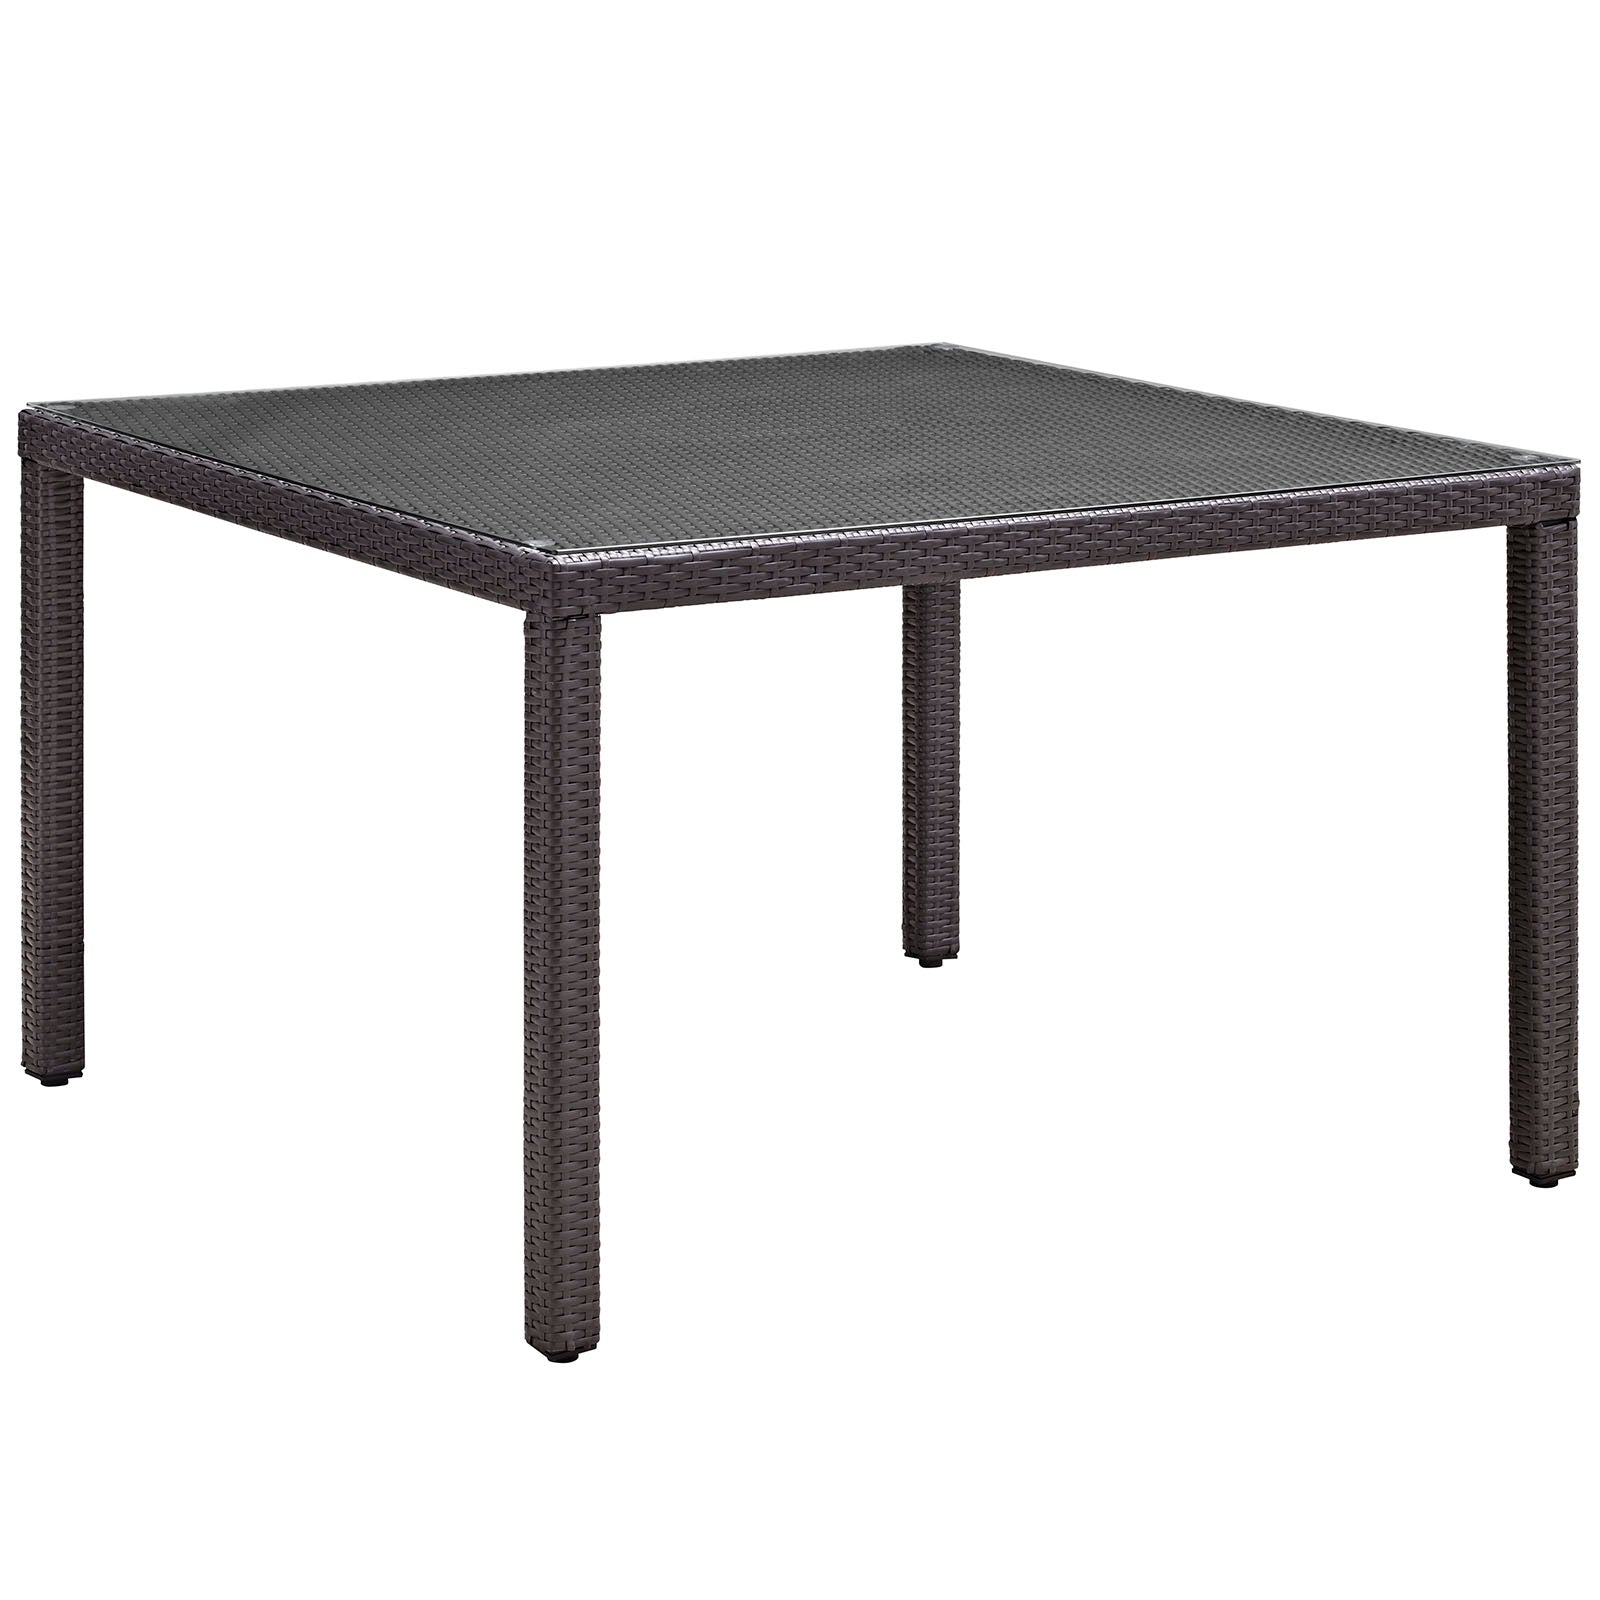 Convene 47" Square Outdoor Patio Glass Top Dining Table - East Shore Modern Home Furnishings